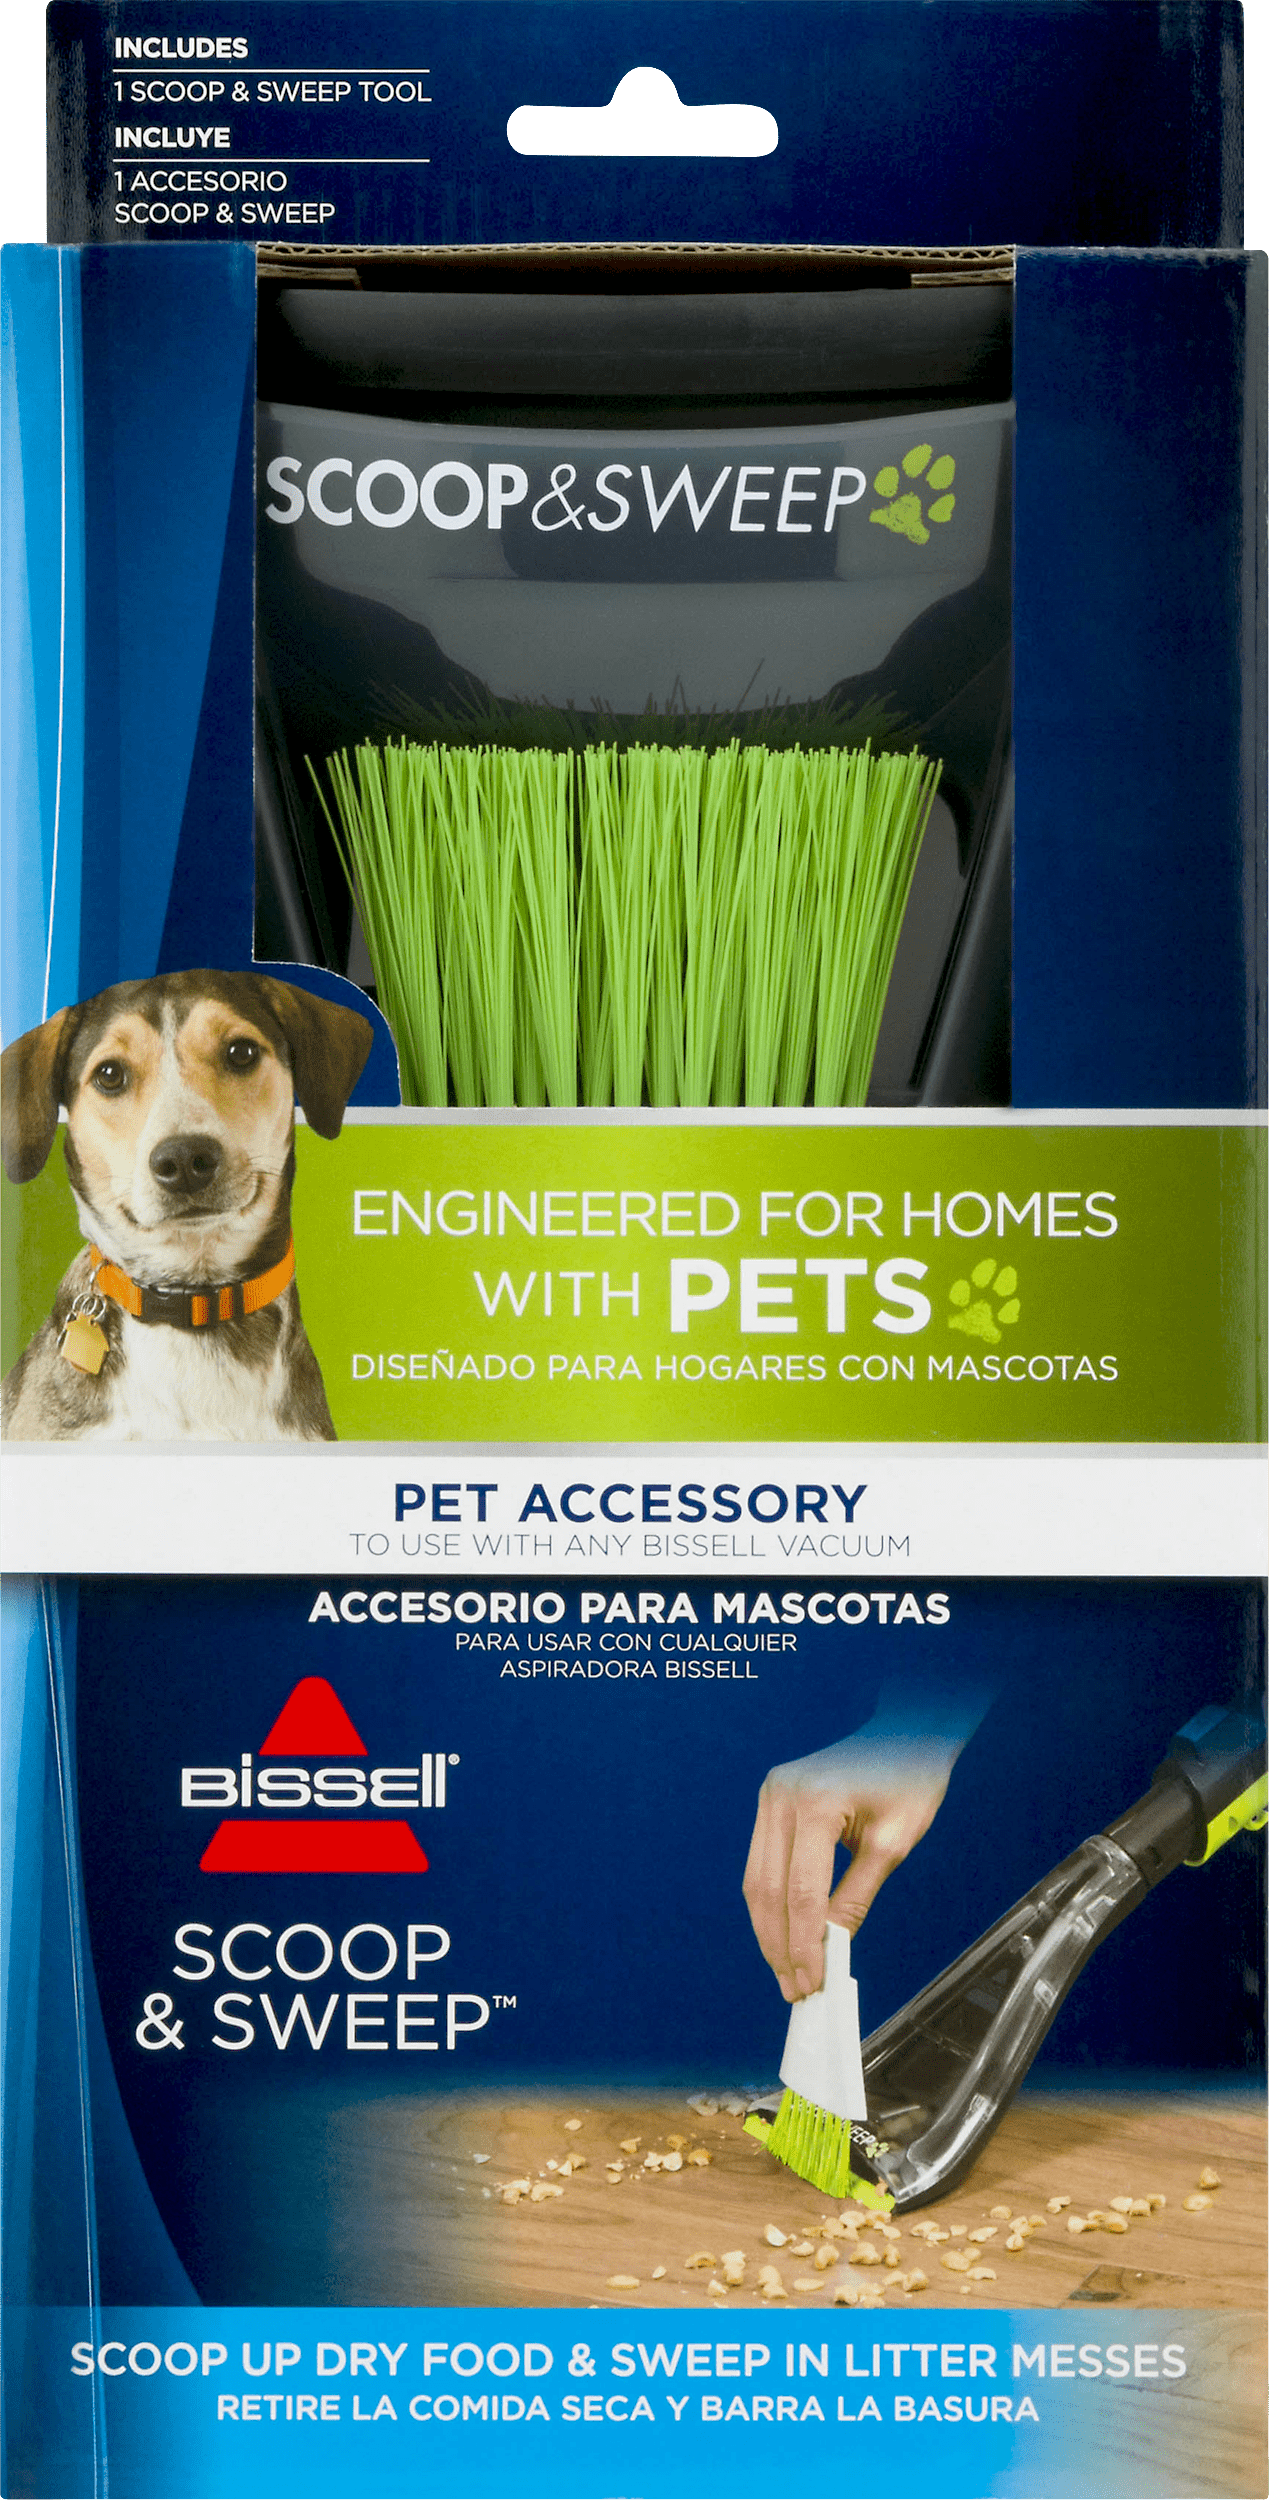 Details about   NIB Bissell Vacuum Scoop & Sweep 2-Piece Tool Pet accessory Model # 1870 